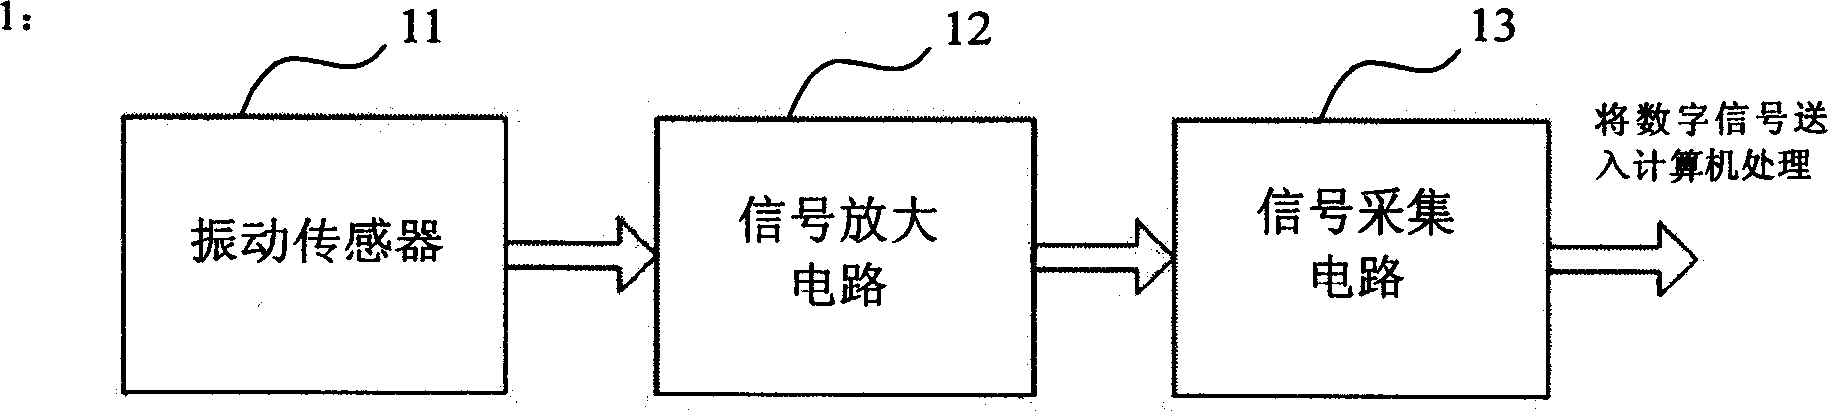 Real-time ultrasonic energy monitoring apparatus and method